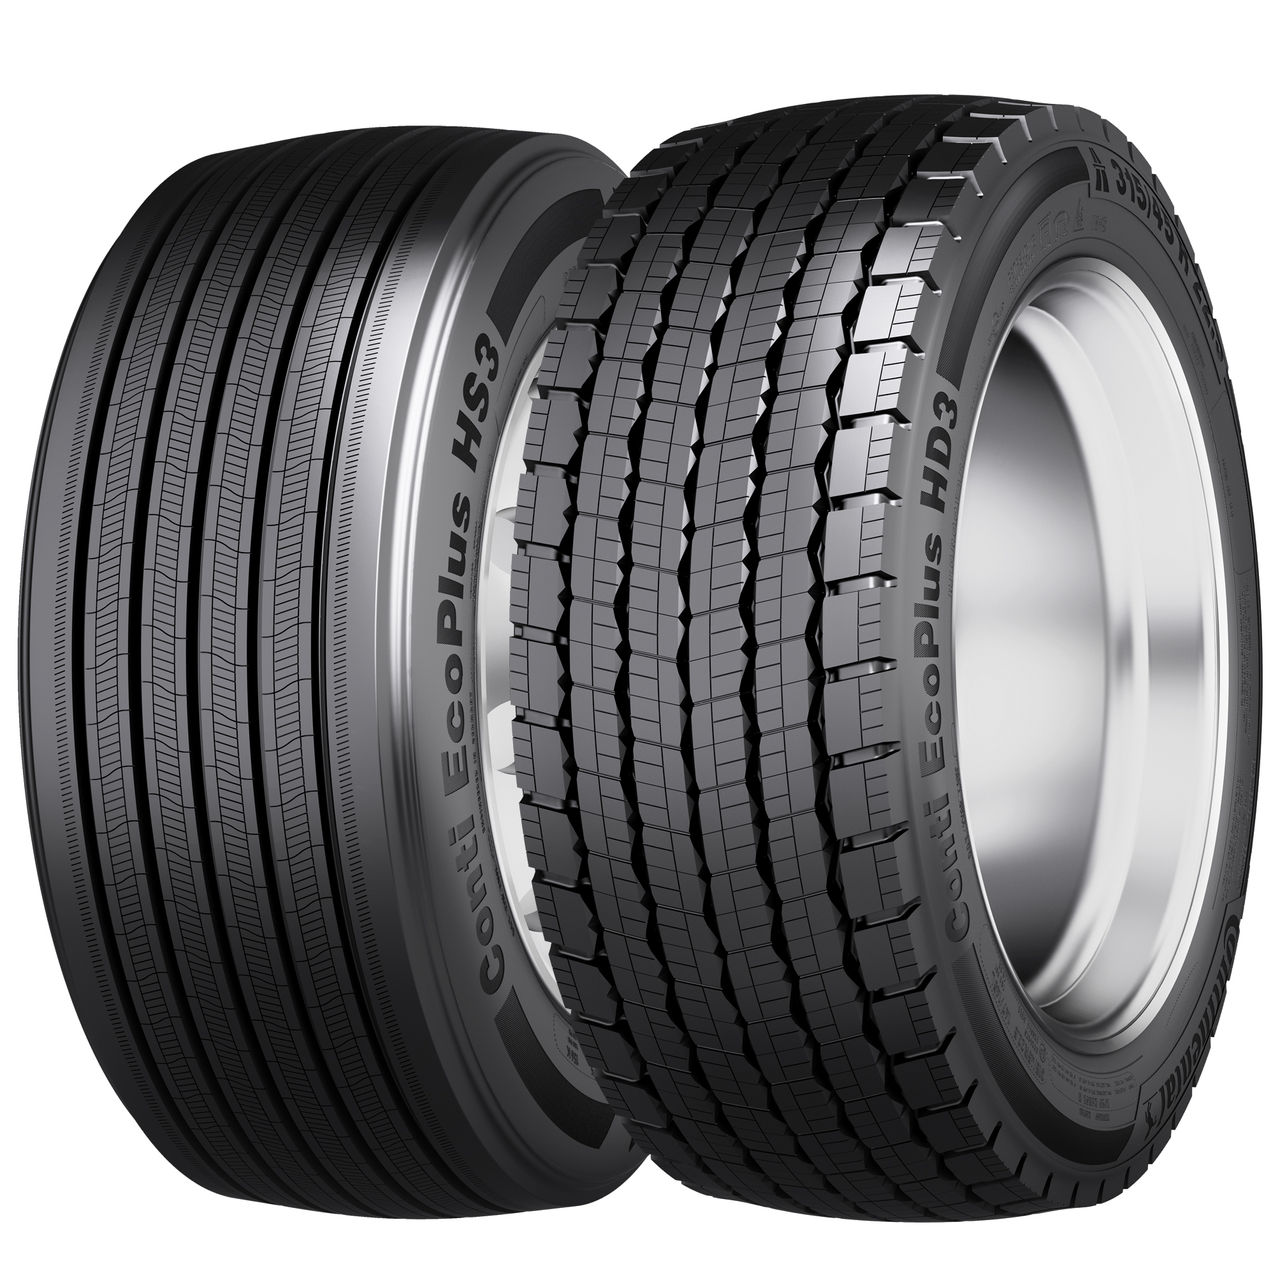 New Tyre Concept for Semitrailer Tractors in Volume Transport